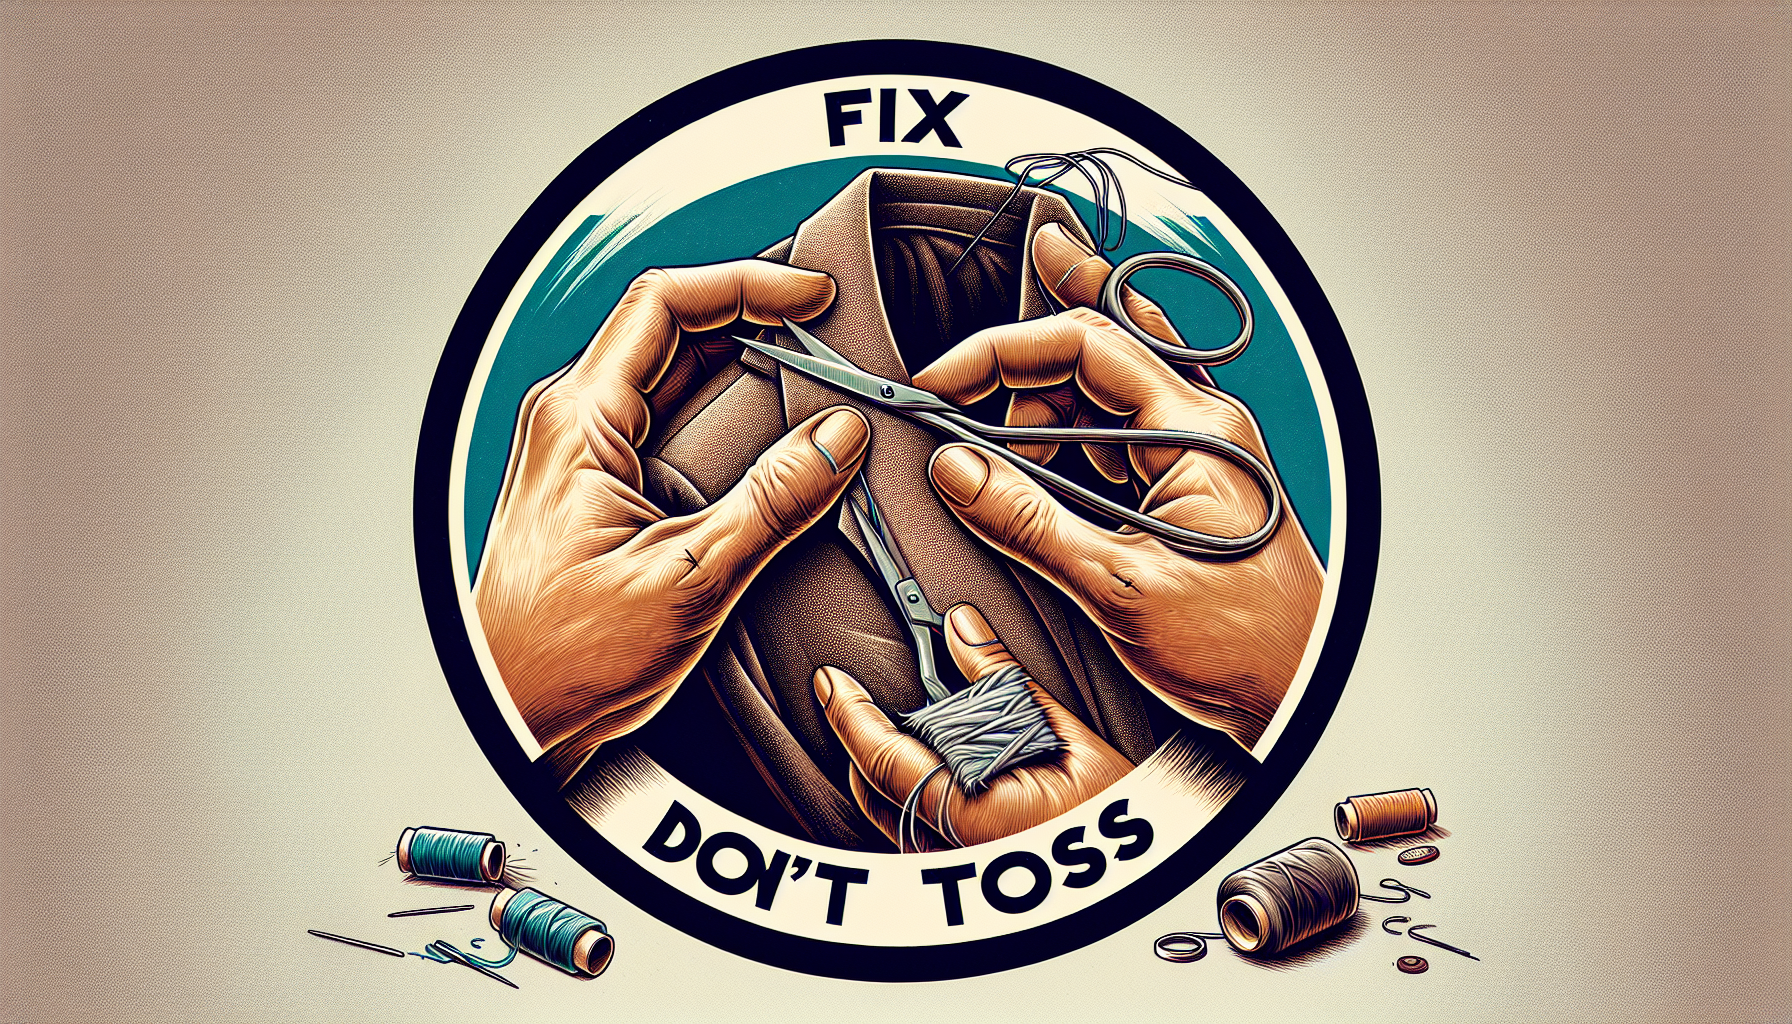 Fix, Don’t Toss! Extend The Life Of Your Belongings And Save Cash